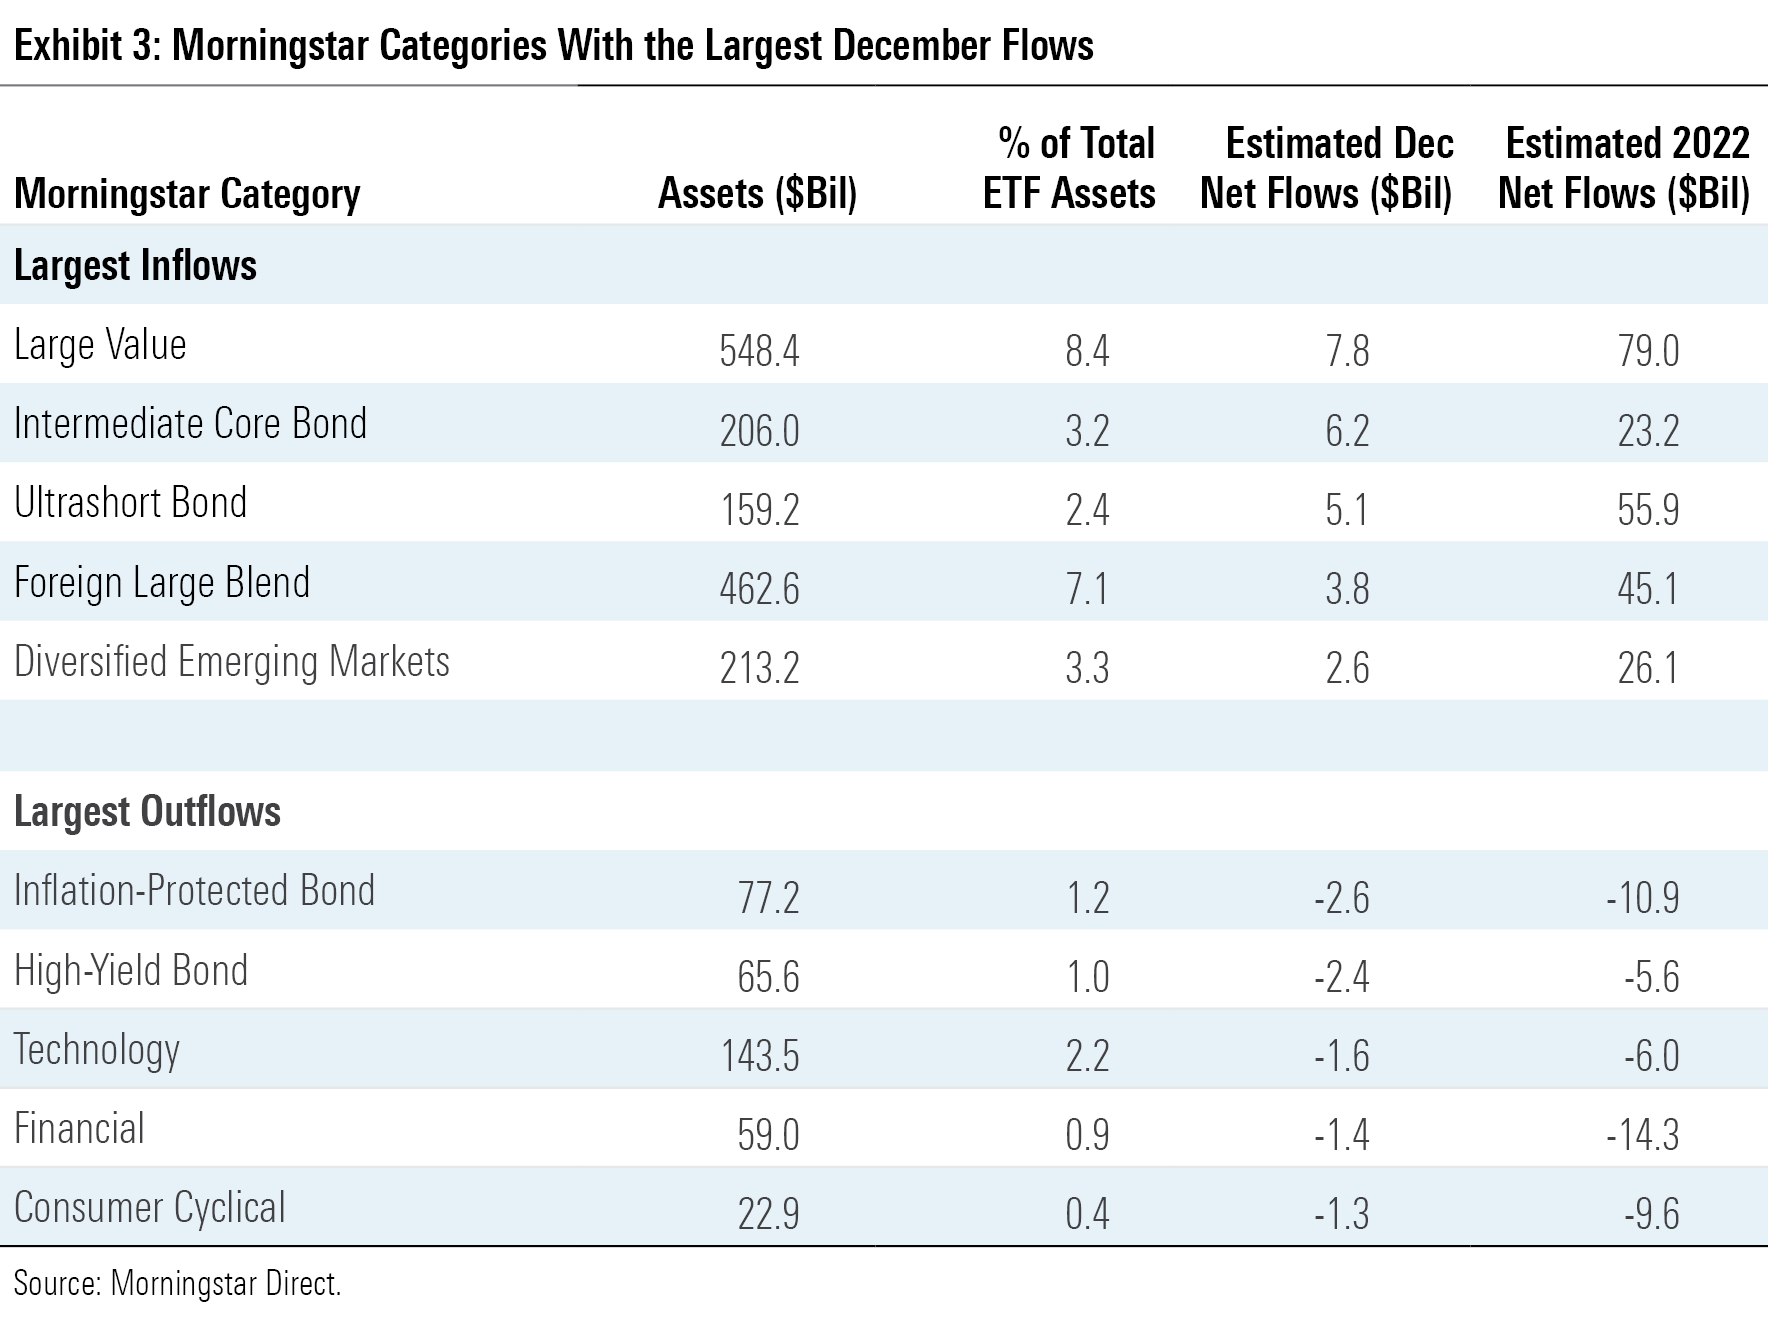 A table of the Morningstar Categories with the largest ETF flows in December 2022.